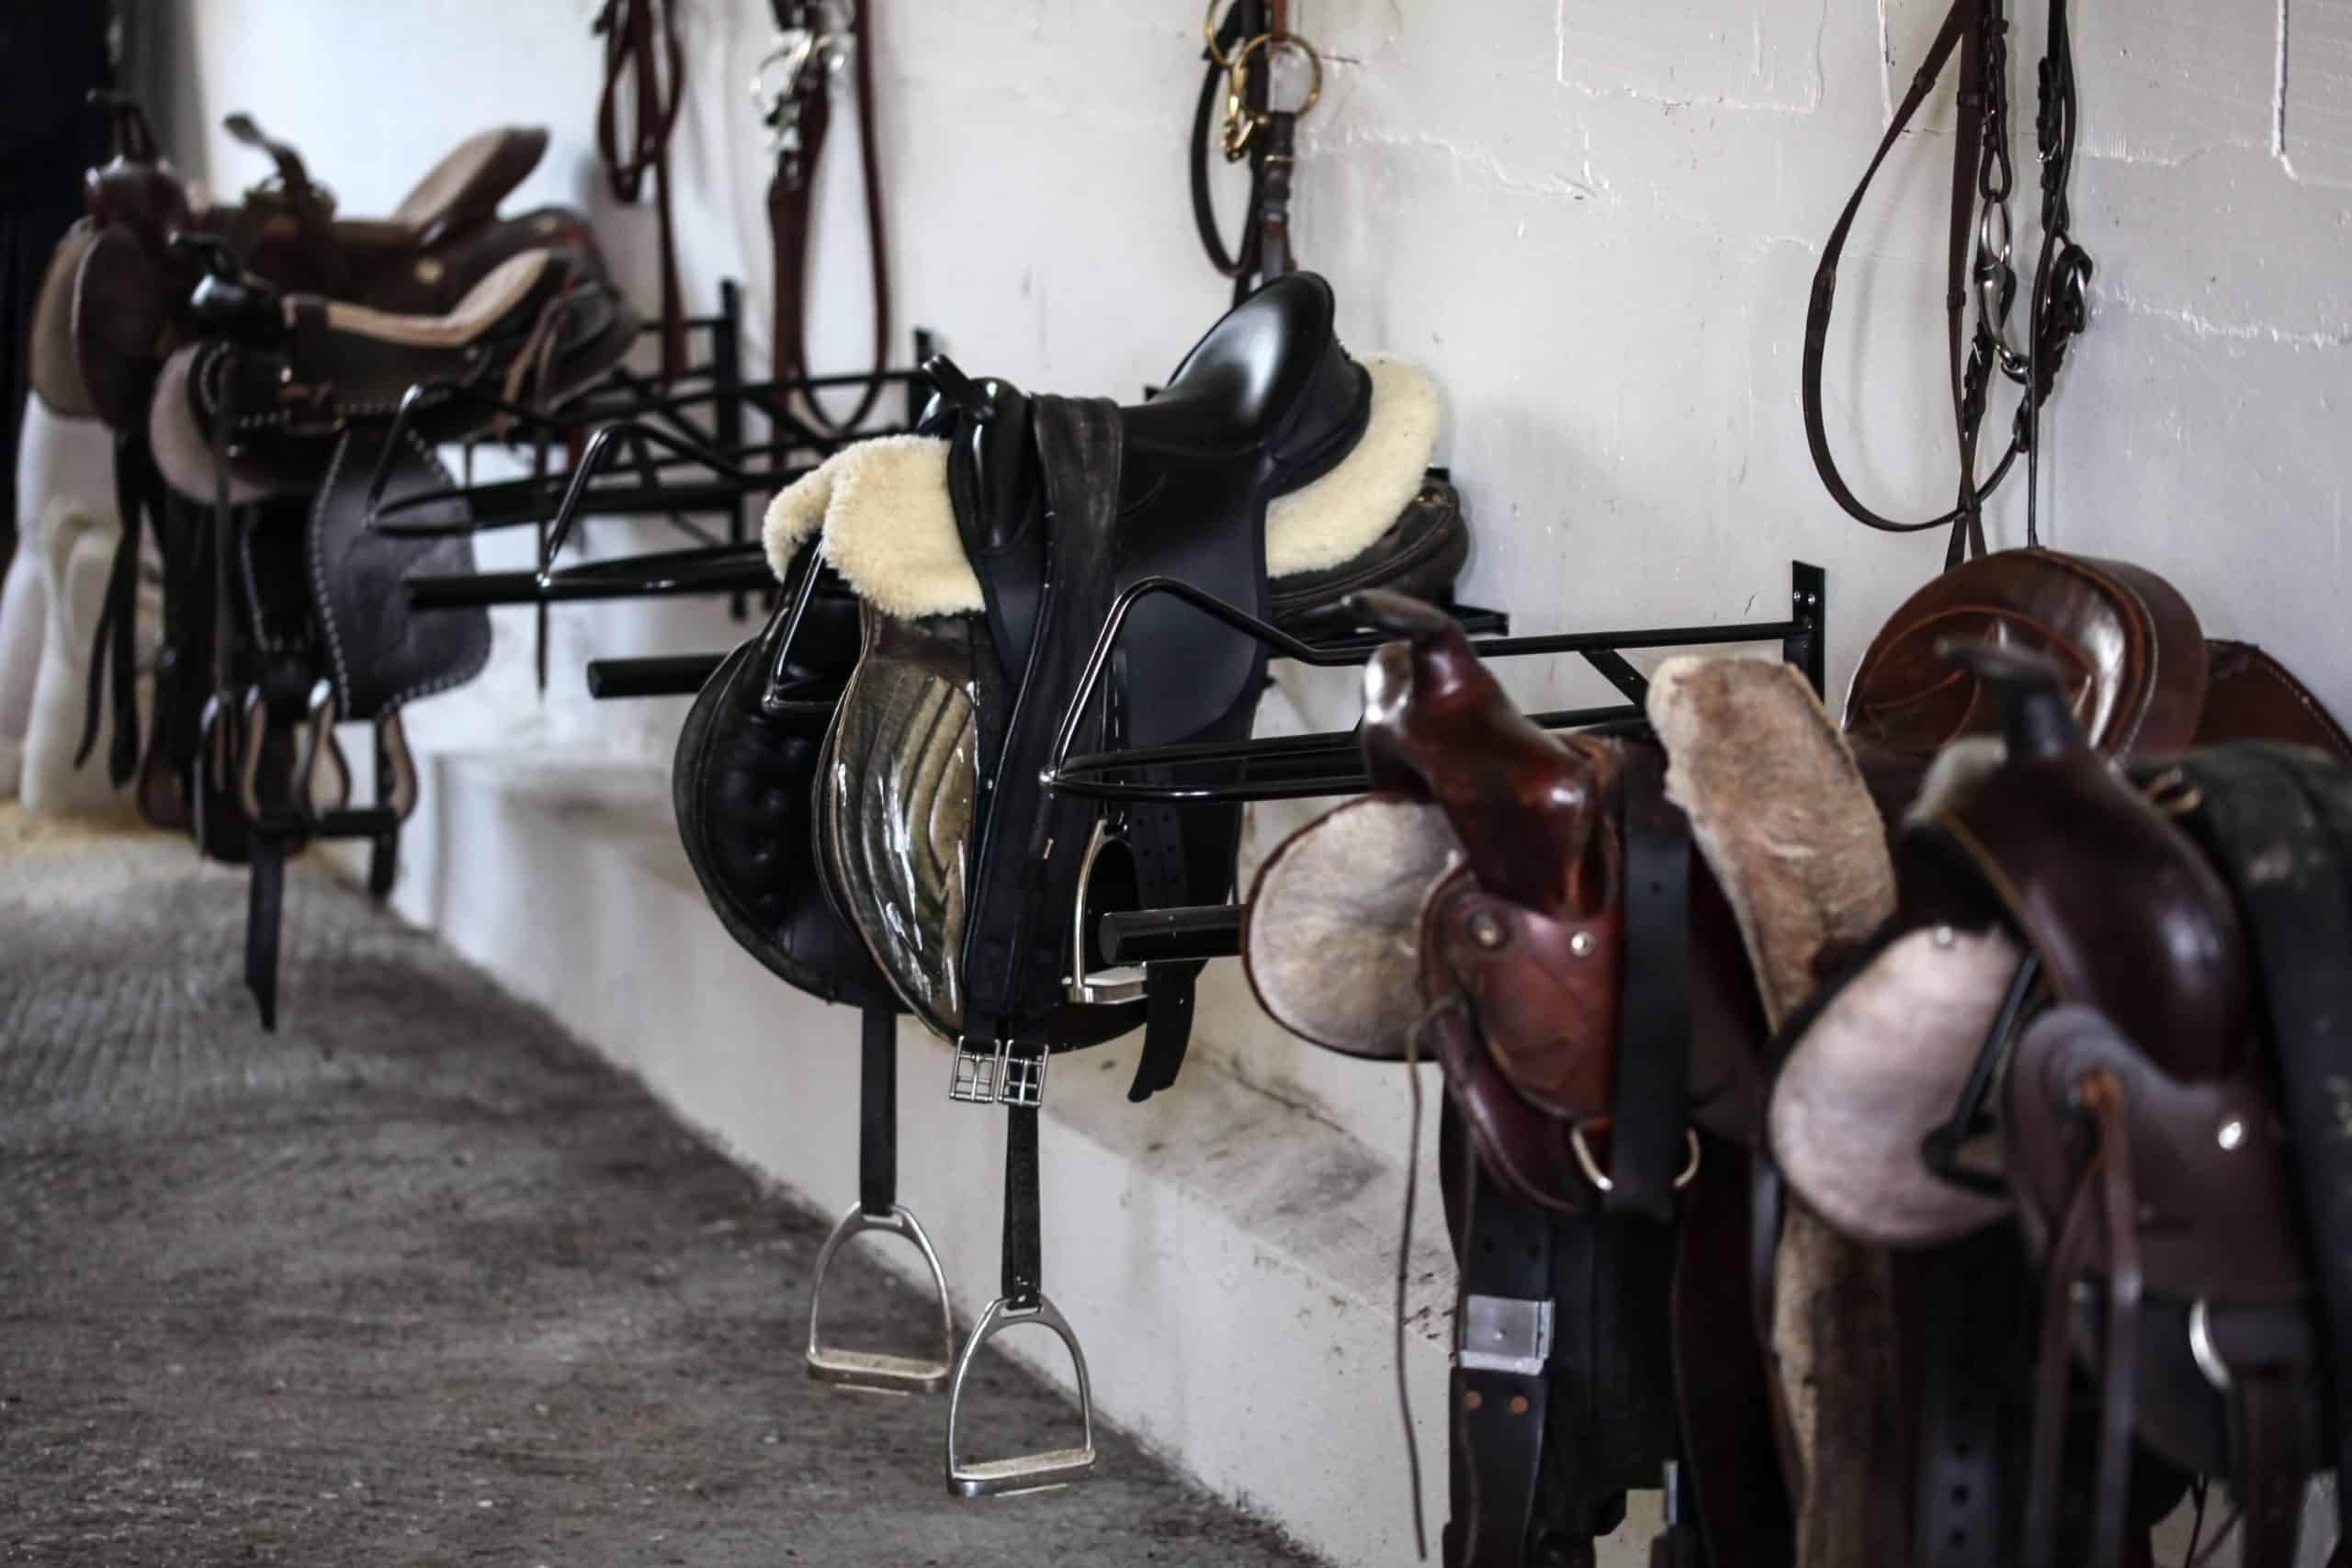 Leather horse saddles and equipment resting on hangers in tack room